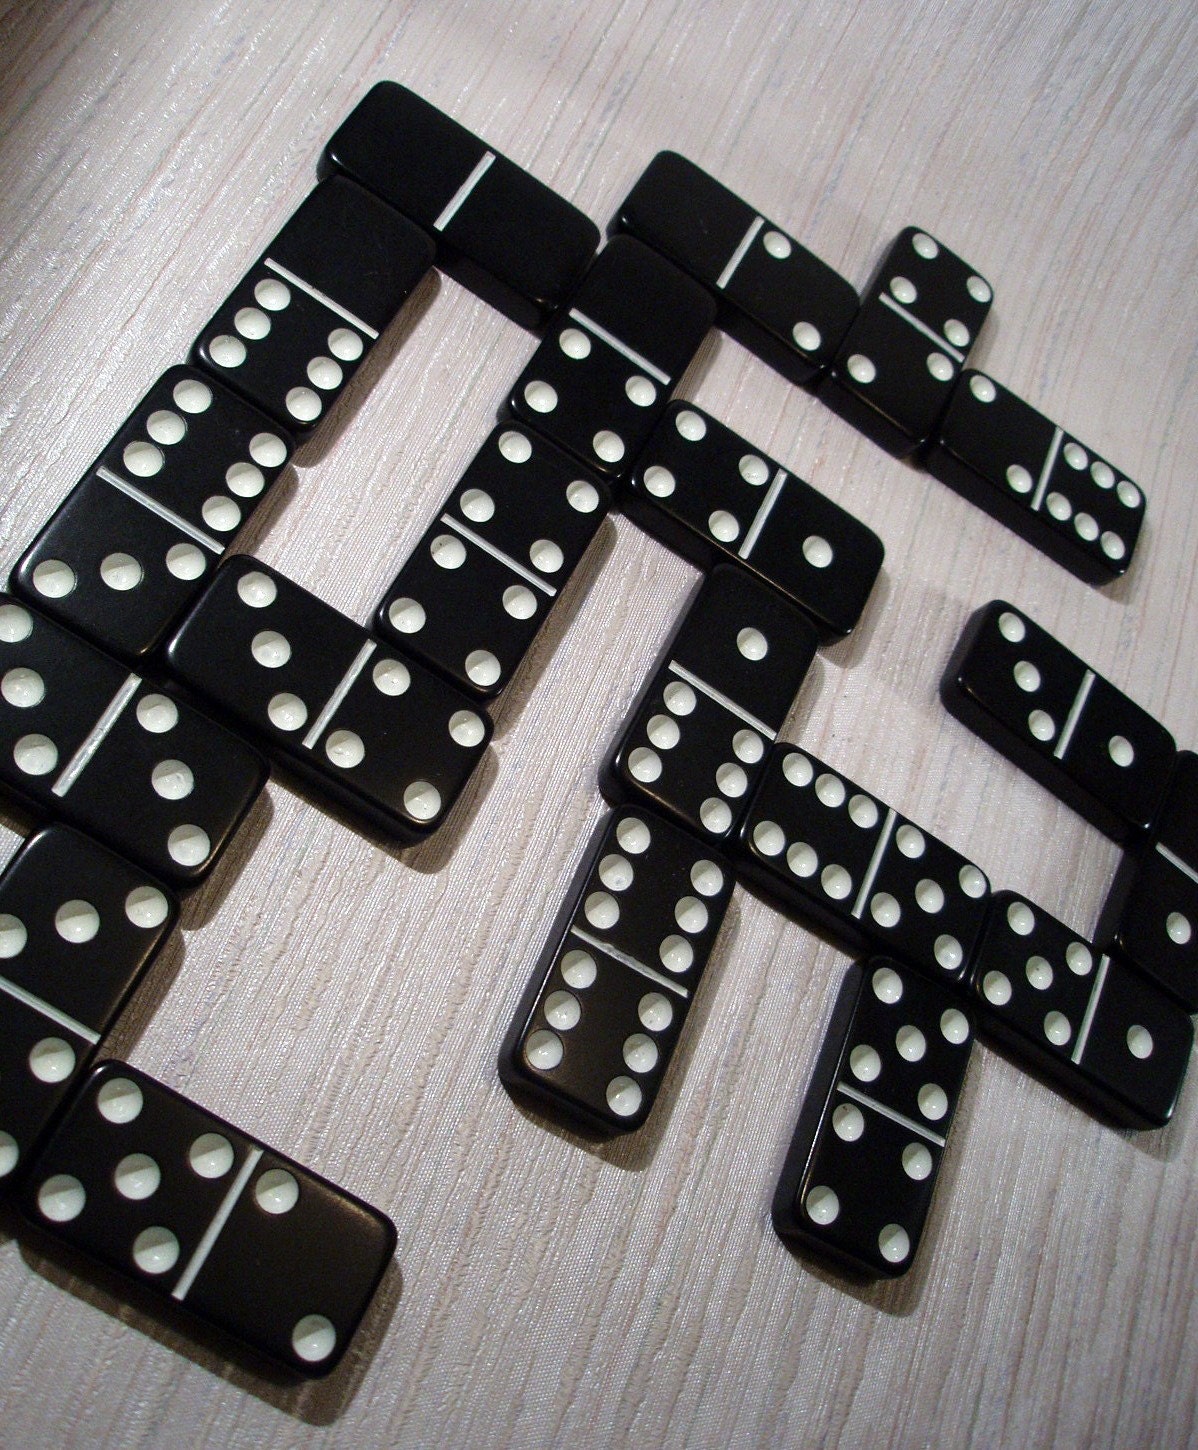 Black Dominoes Set Of 20 By Stashed On Etsy